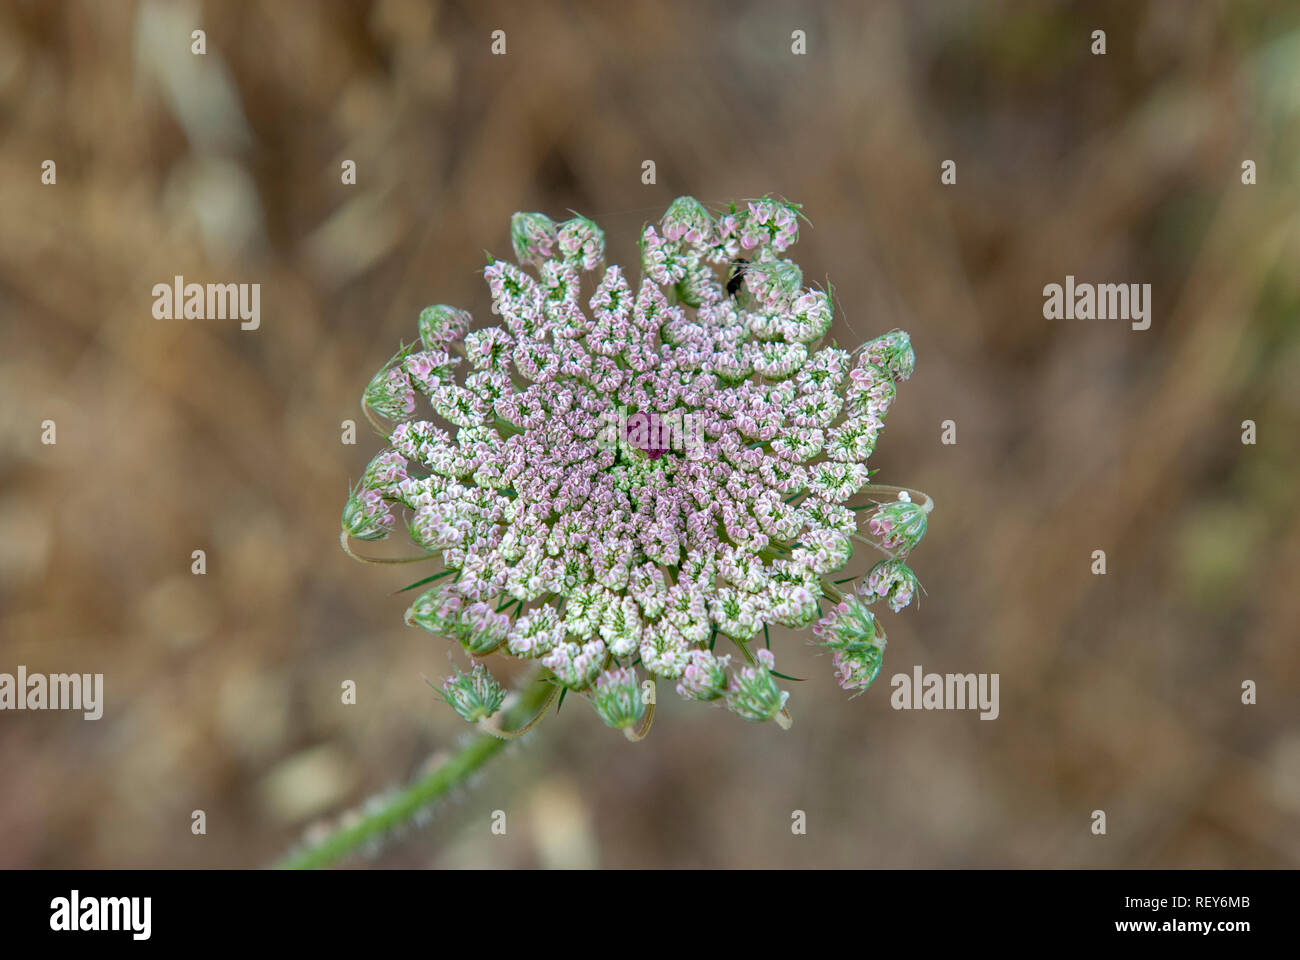 Daucus carota (common names include wild carrot, bird's nest, bishop's lace, and Queen Anne's lace). Photographed in May in the Jerusalem region, Isra Stock Photo